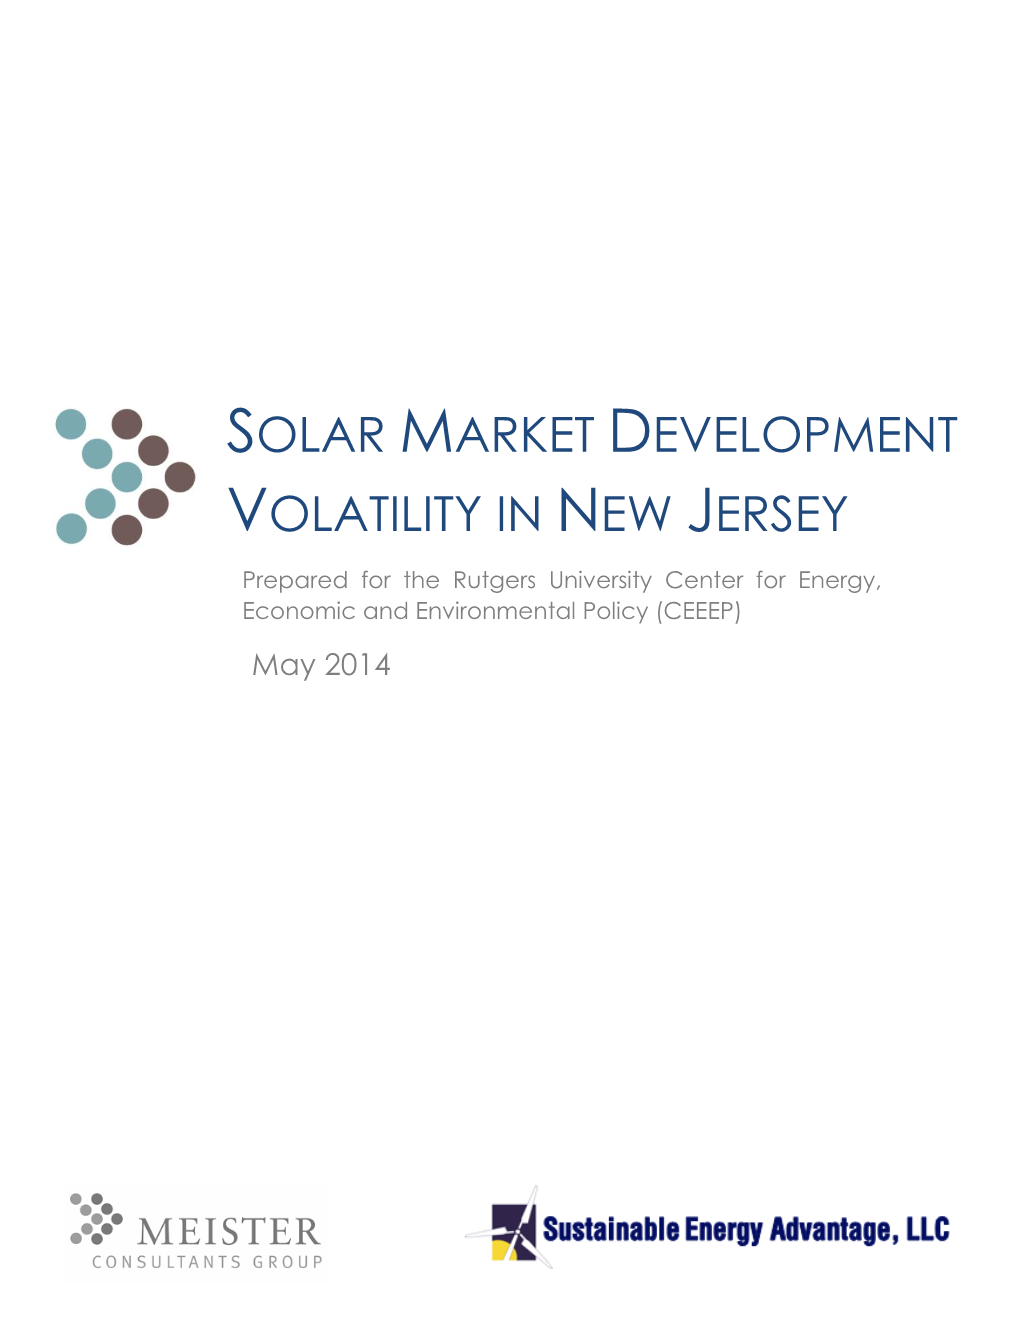 Solar Market Development Volatility in New Jersey and Provides a Range of Potential Solutions to Mitigate It in the Future